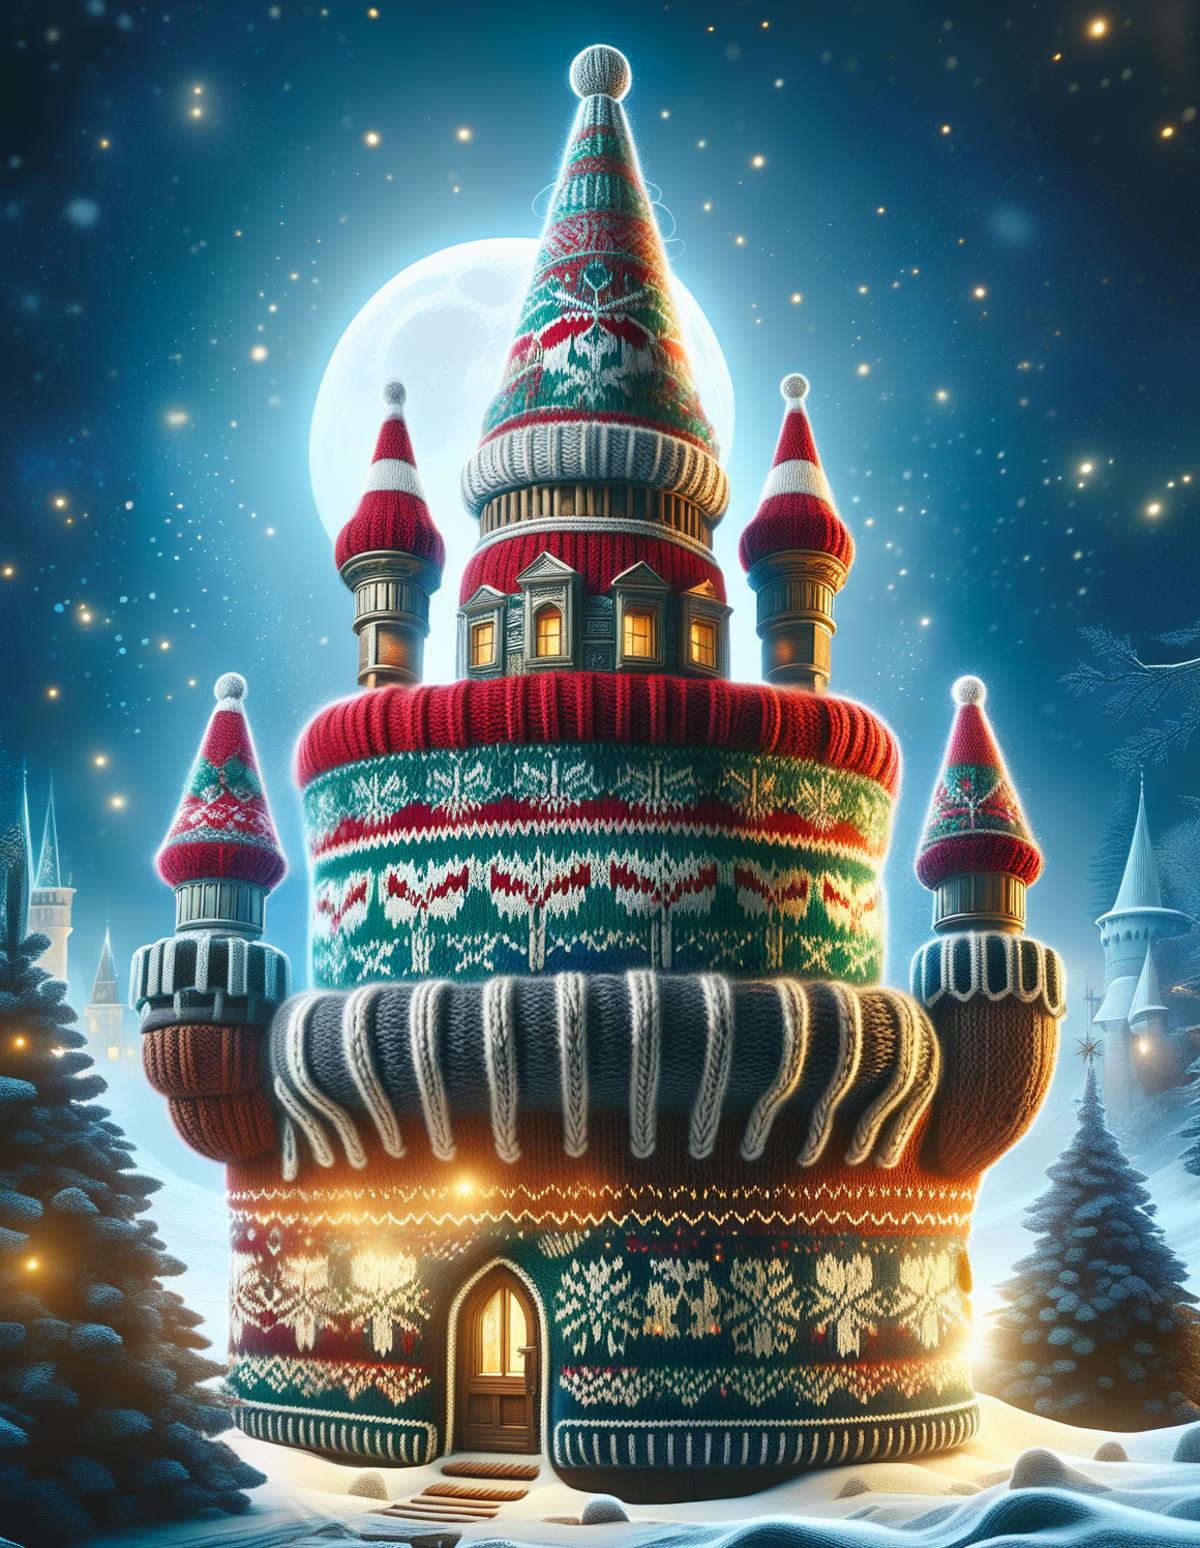 A Christmas Castle Cake with a Moonlit Night Sky in the Background